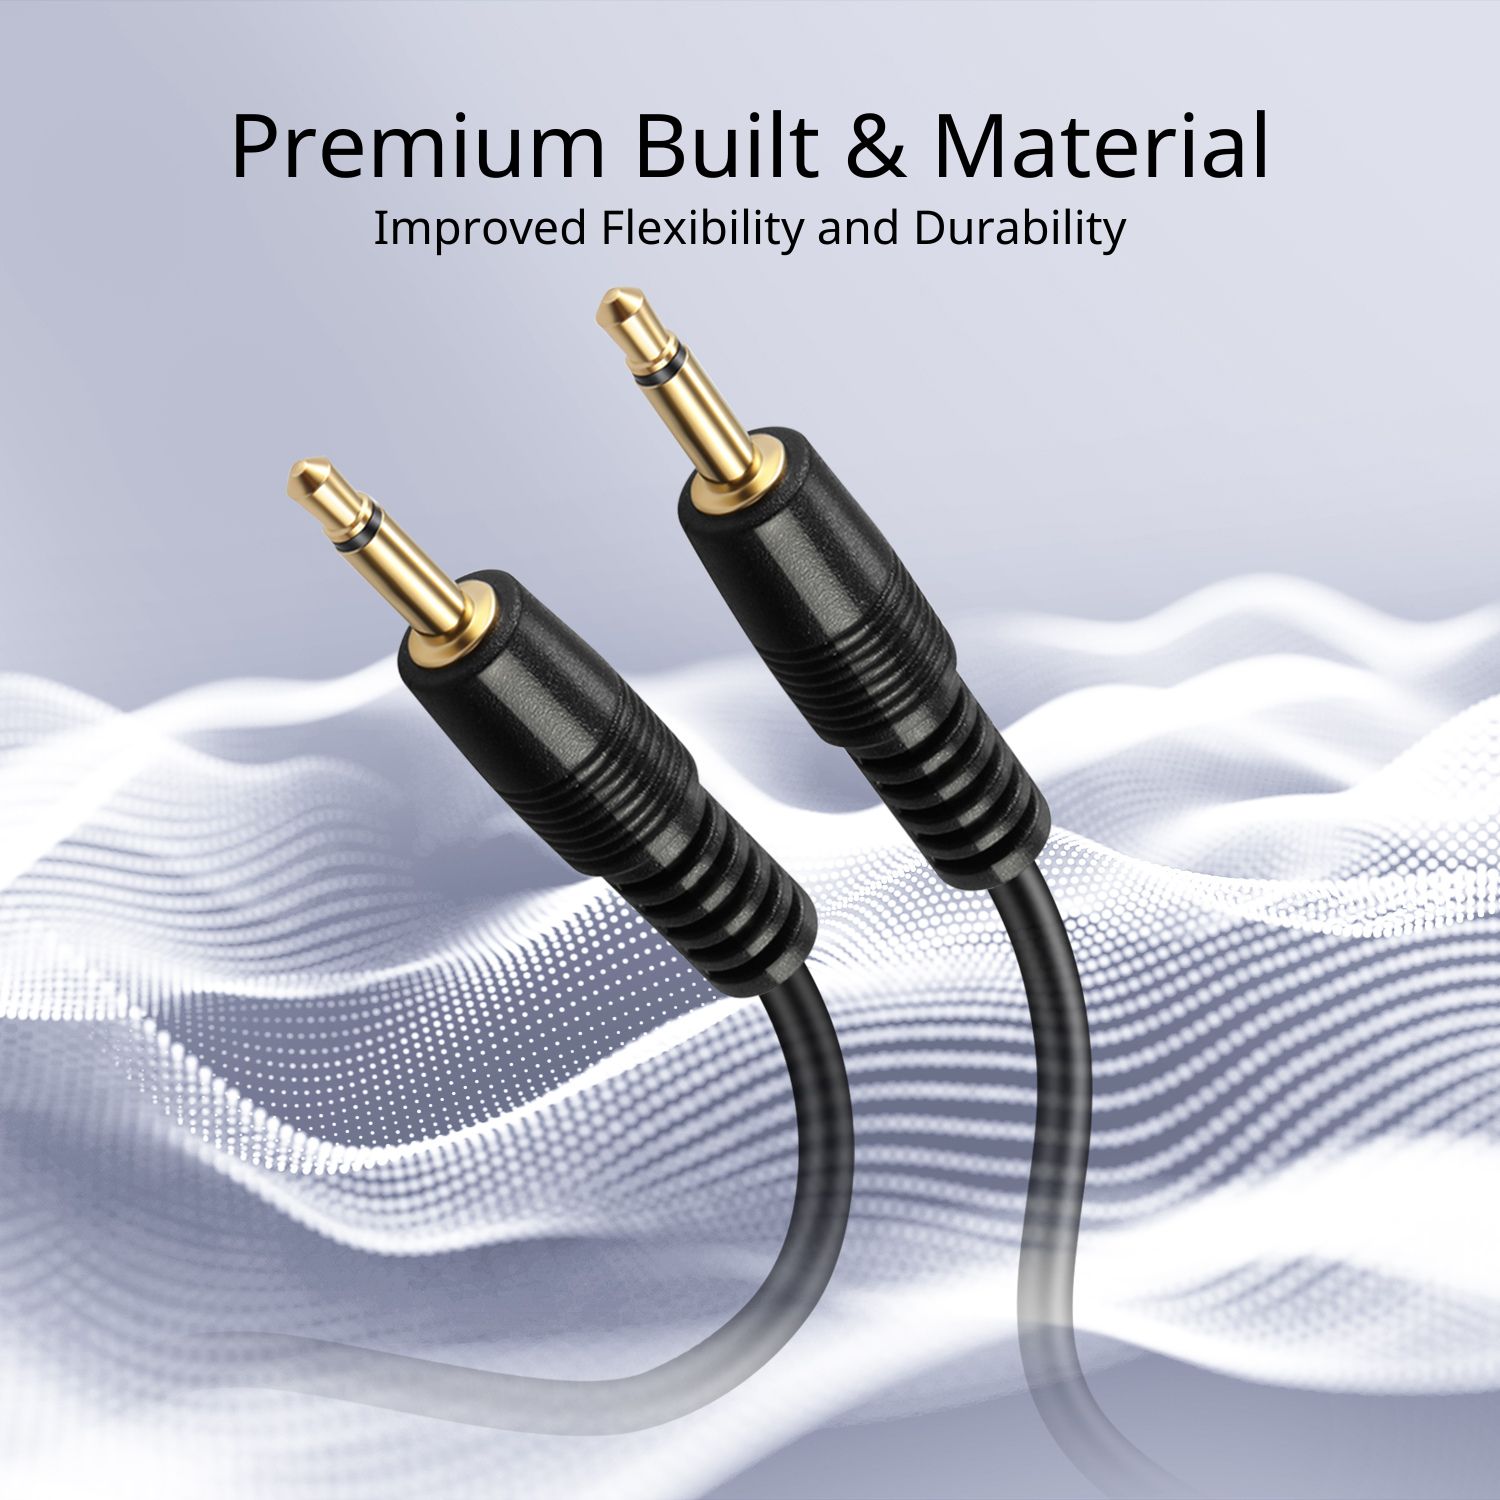 Deliver quality signal connectivity; Molded connectors with strain relief ensure a solid high quality connection between the connected devices